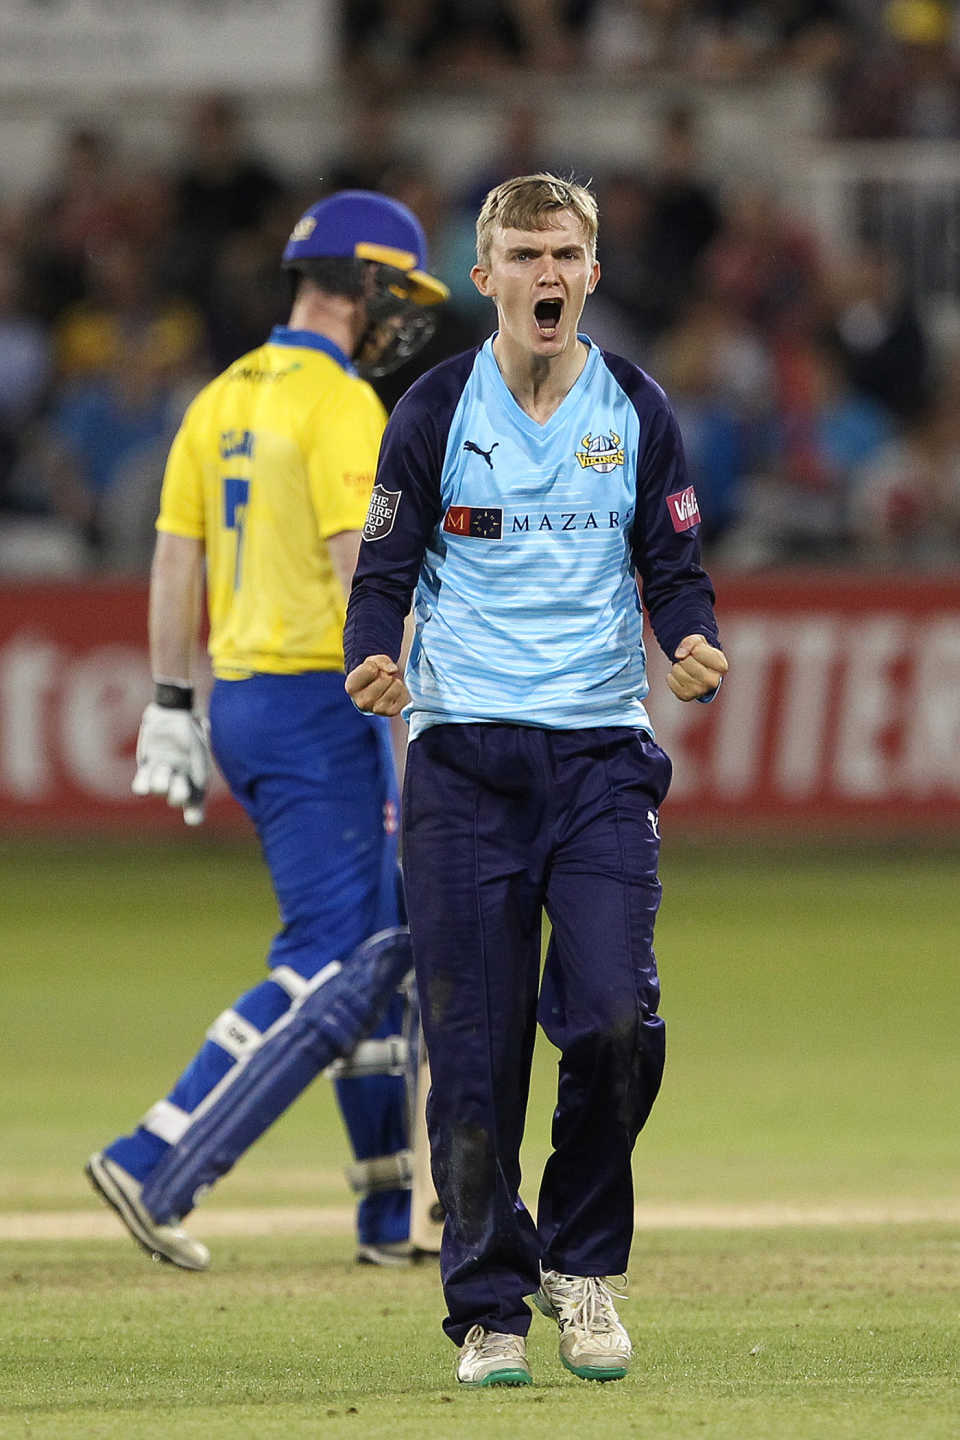 Jack Shutt claimed a five-wicket haul, Durham v Yorkshire, Vitality Blast, North Group, August 23, 2019